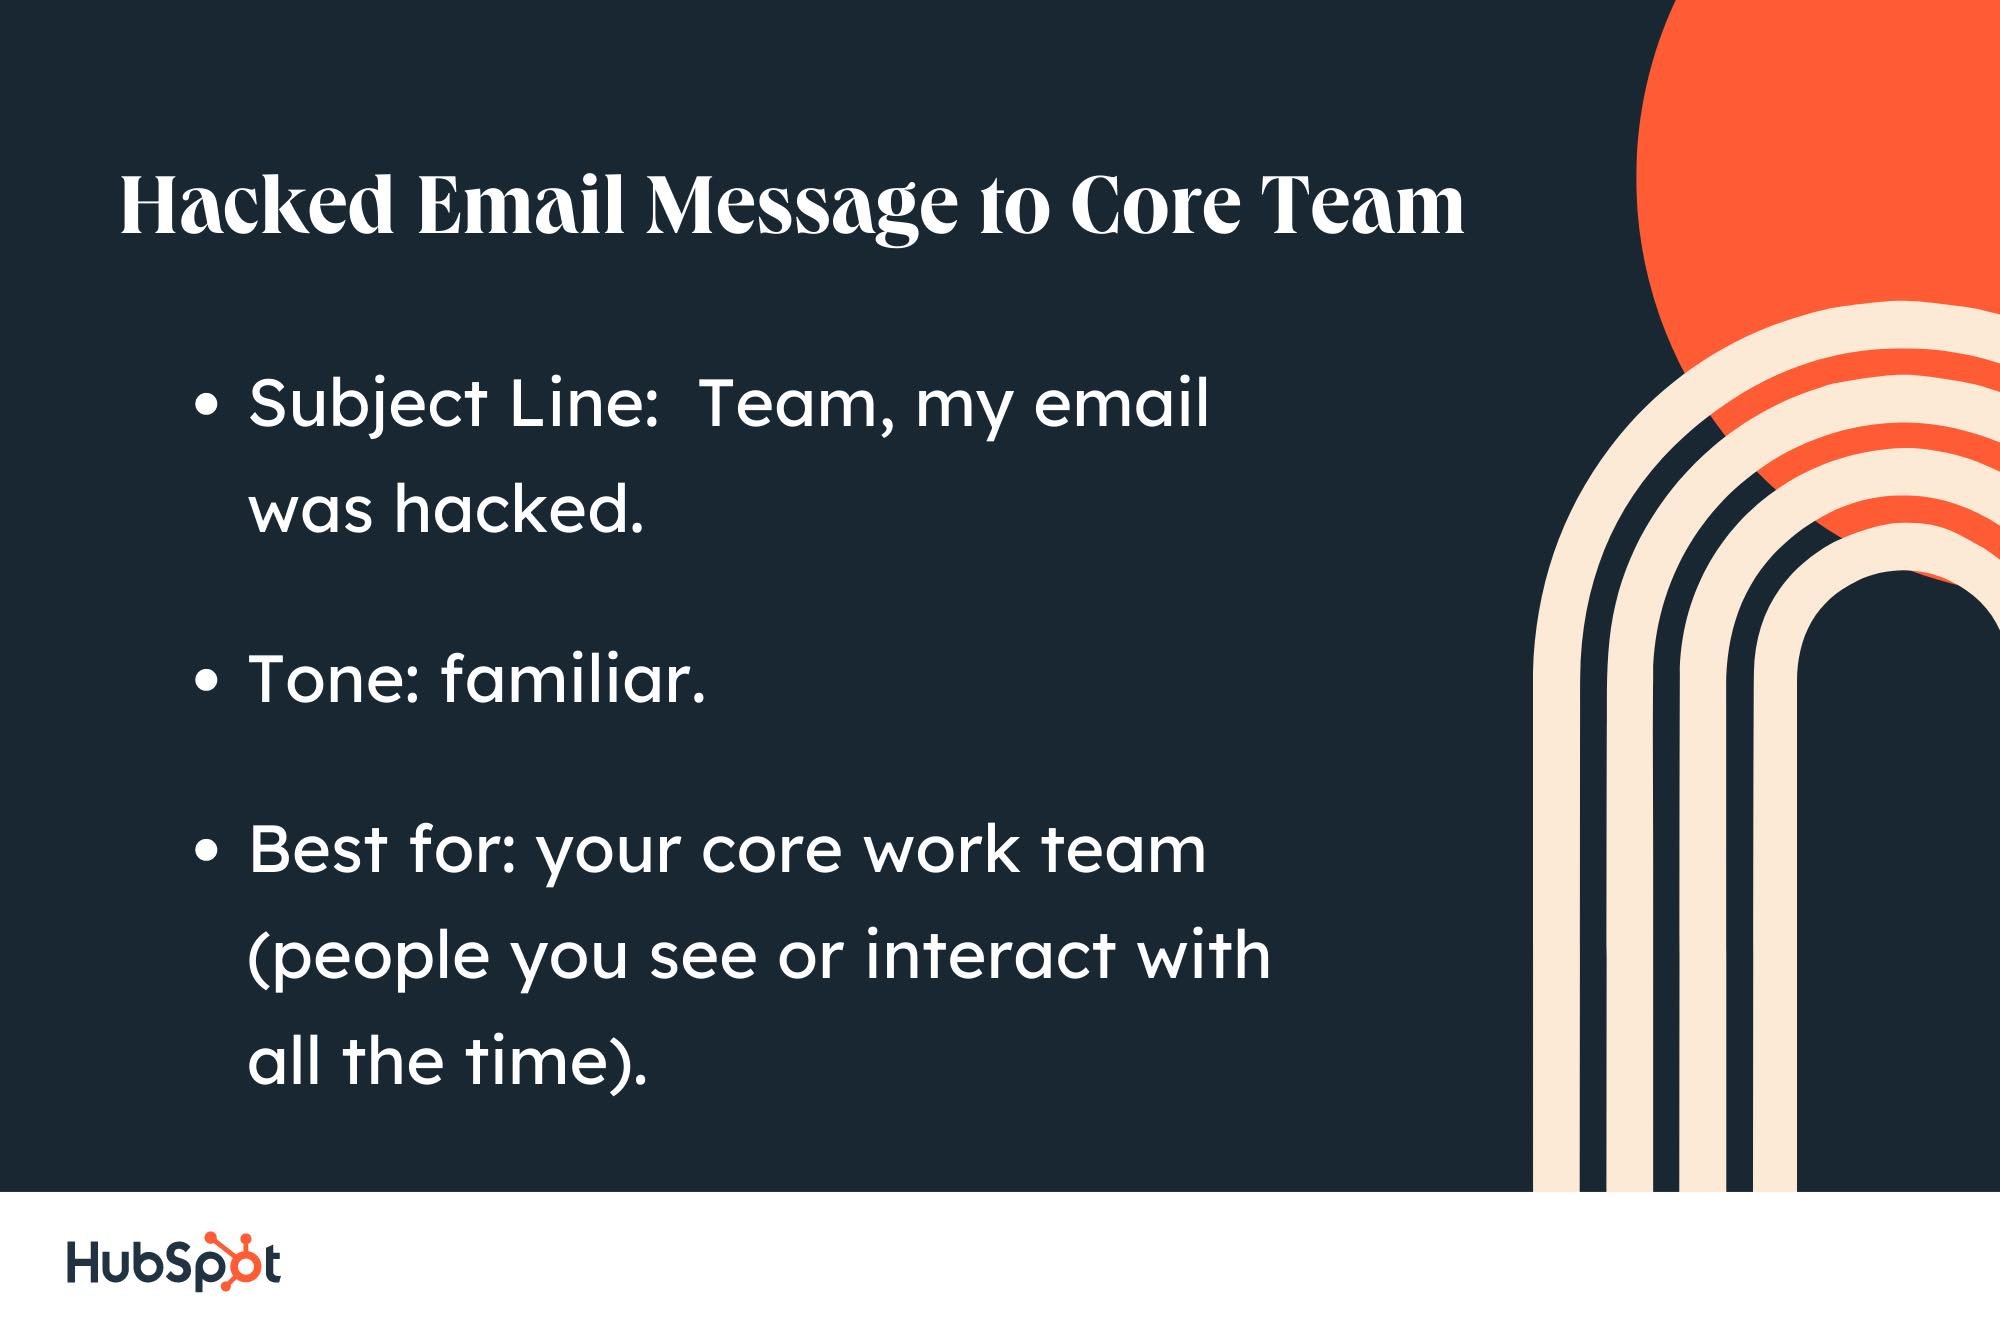 sample letter for hacked email: subject line, Team, my email was hacked;  tone, familiar;  better for your main work team.